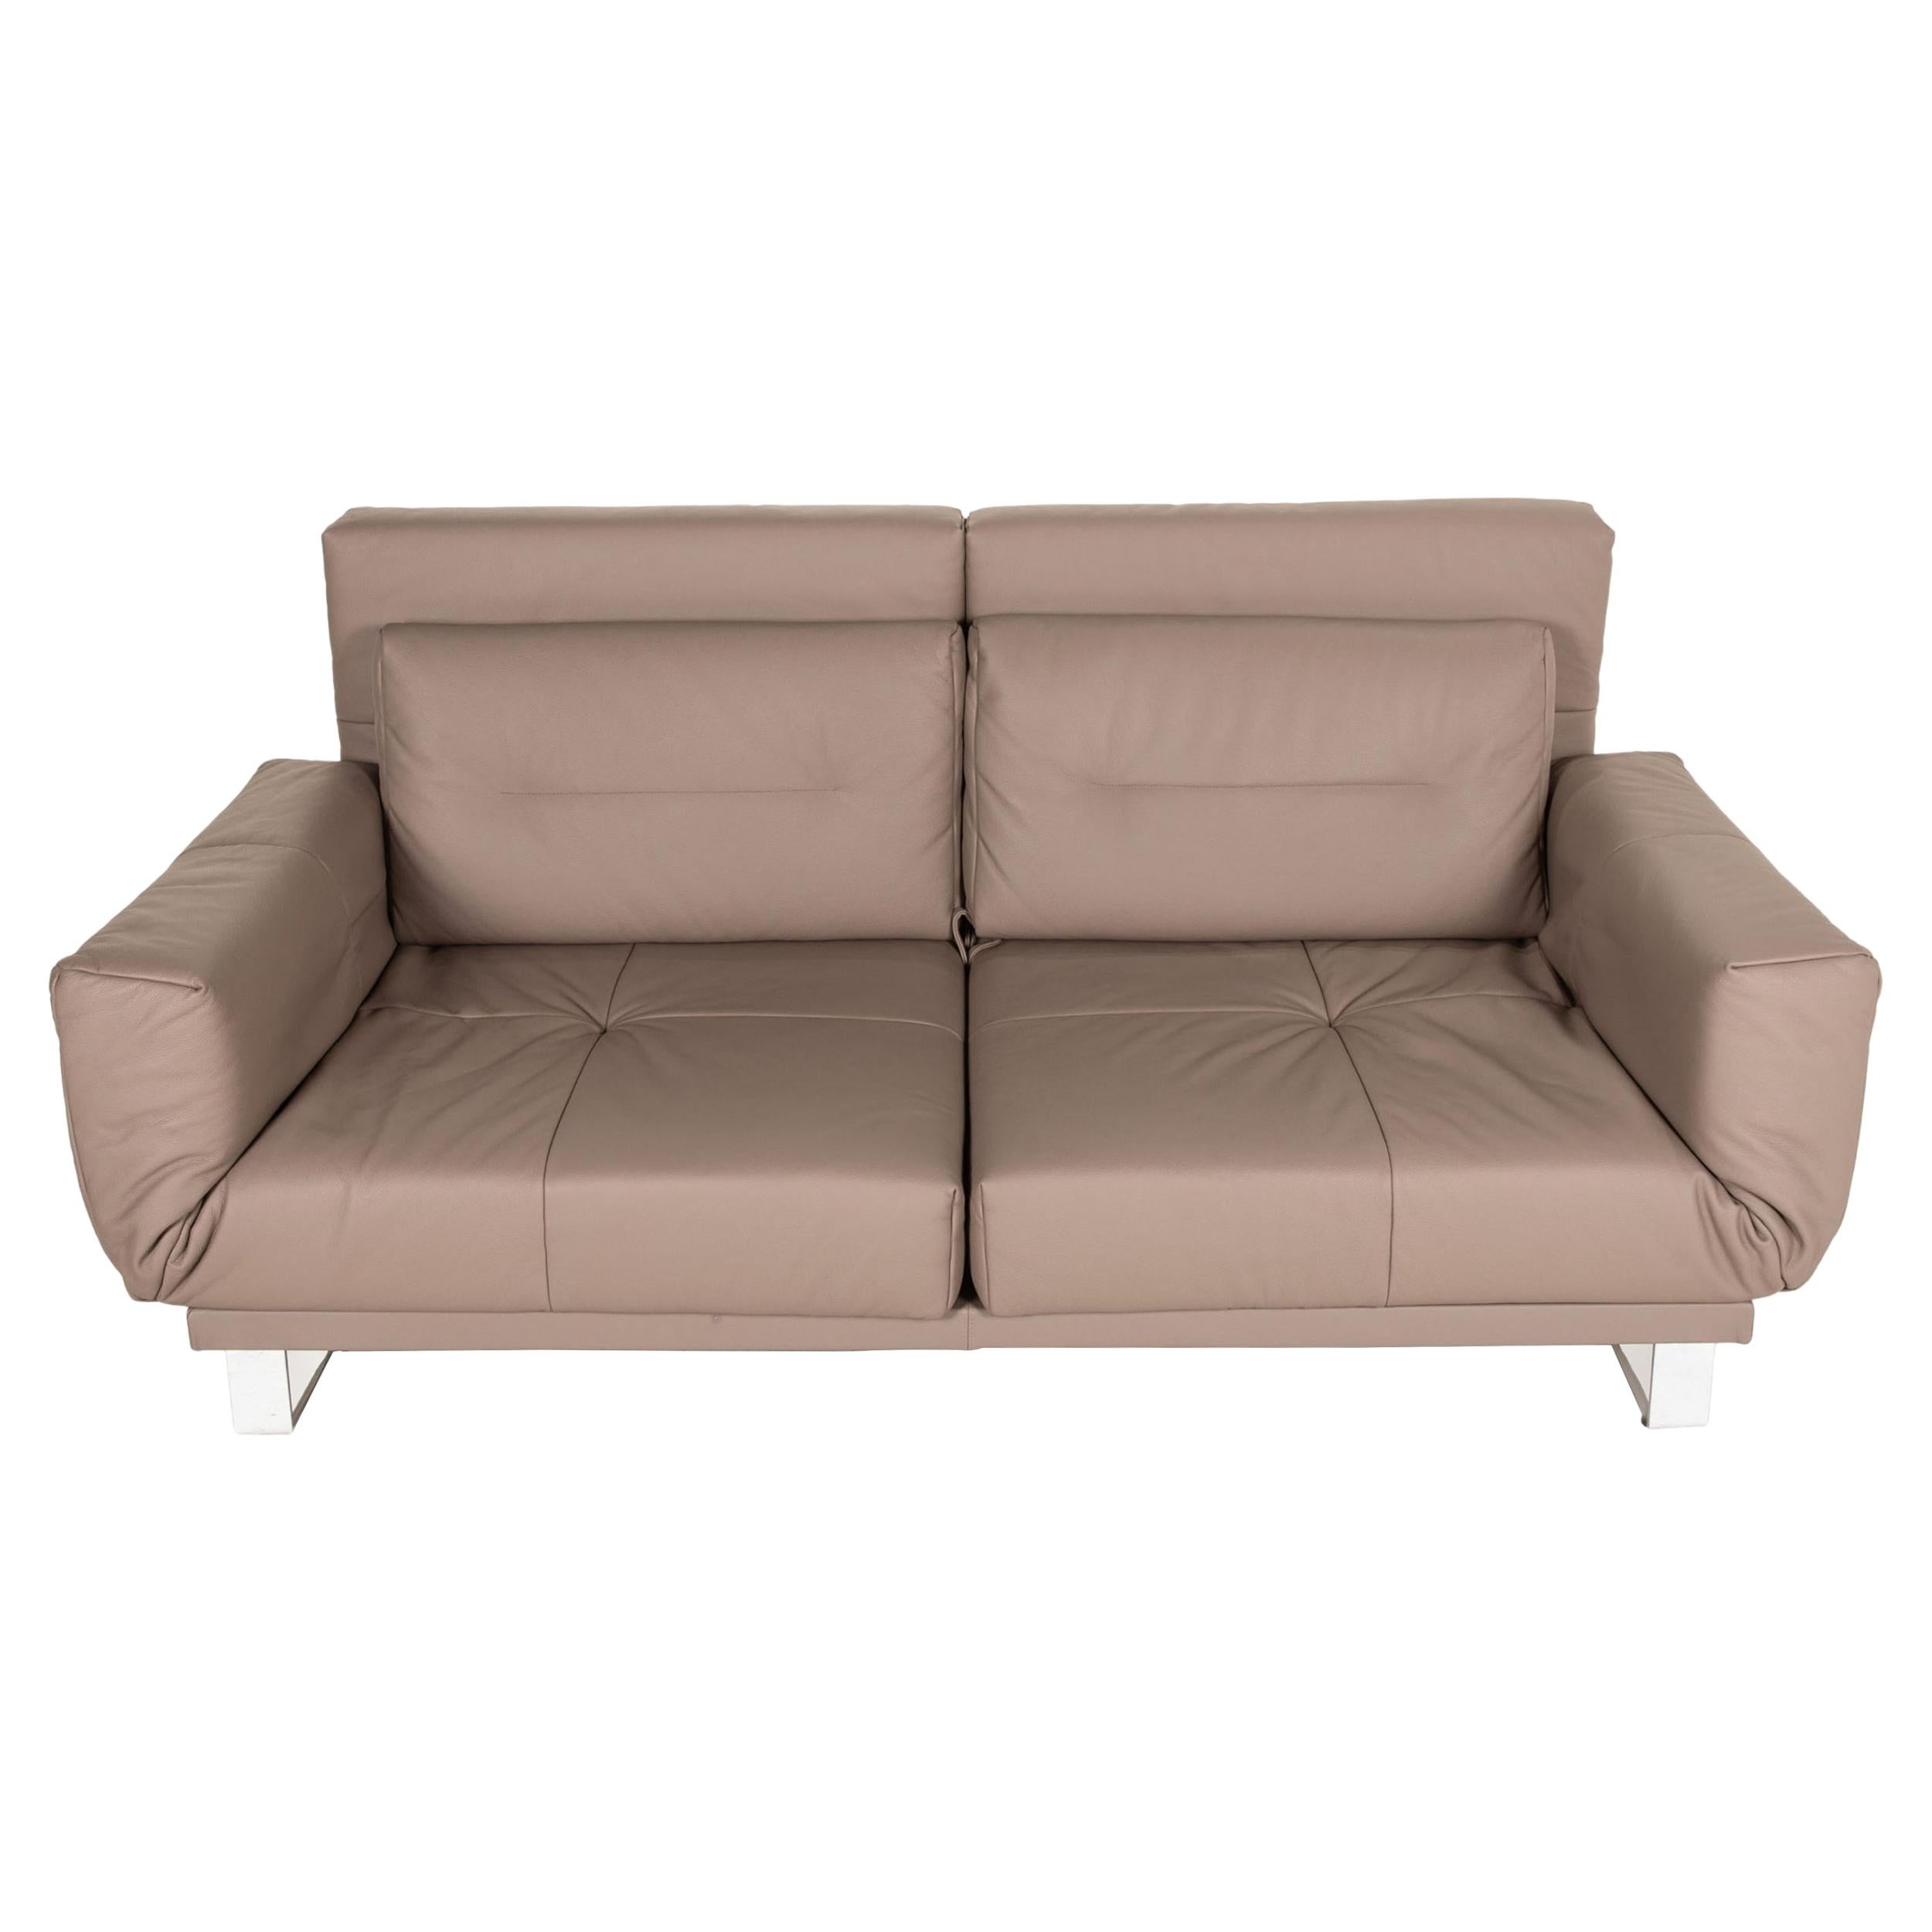 Franz Fertig Letto leather sofa beige two-seater function sleeping function For Sale